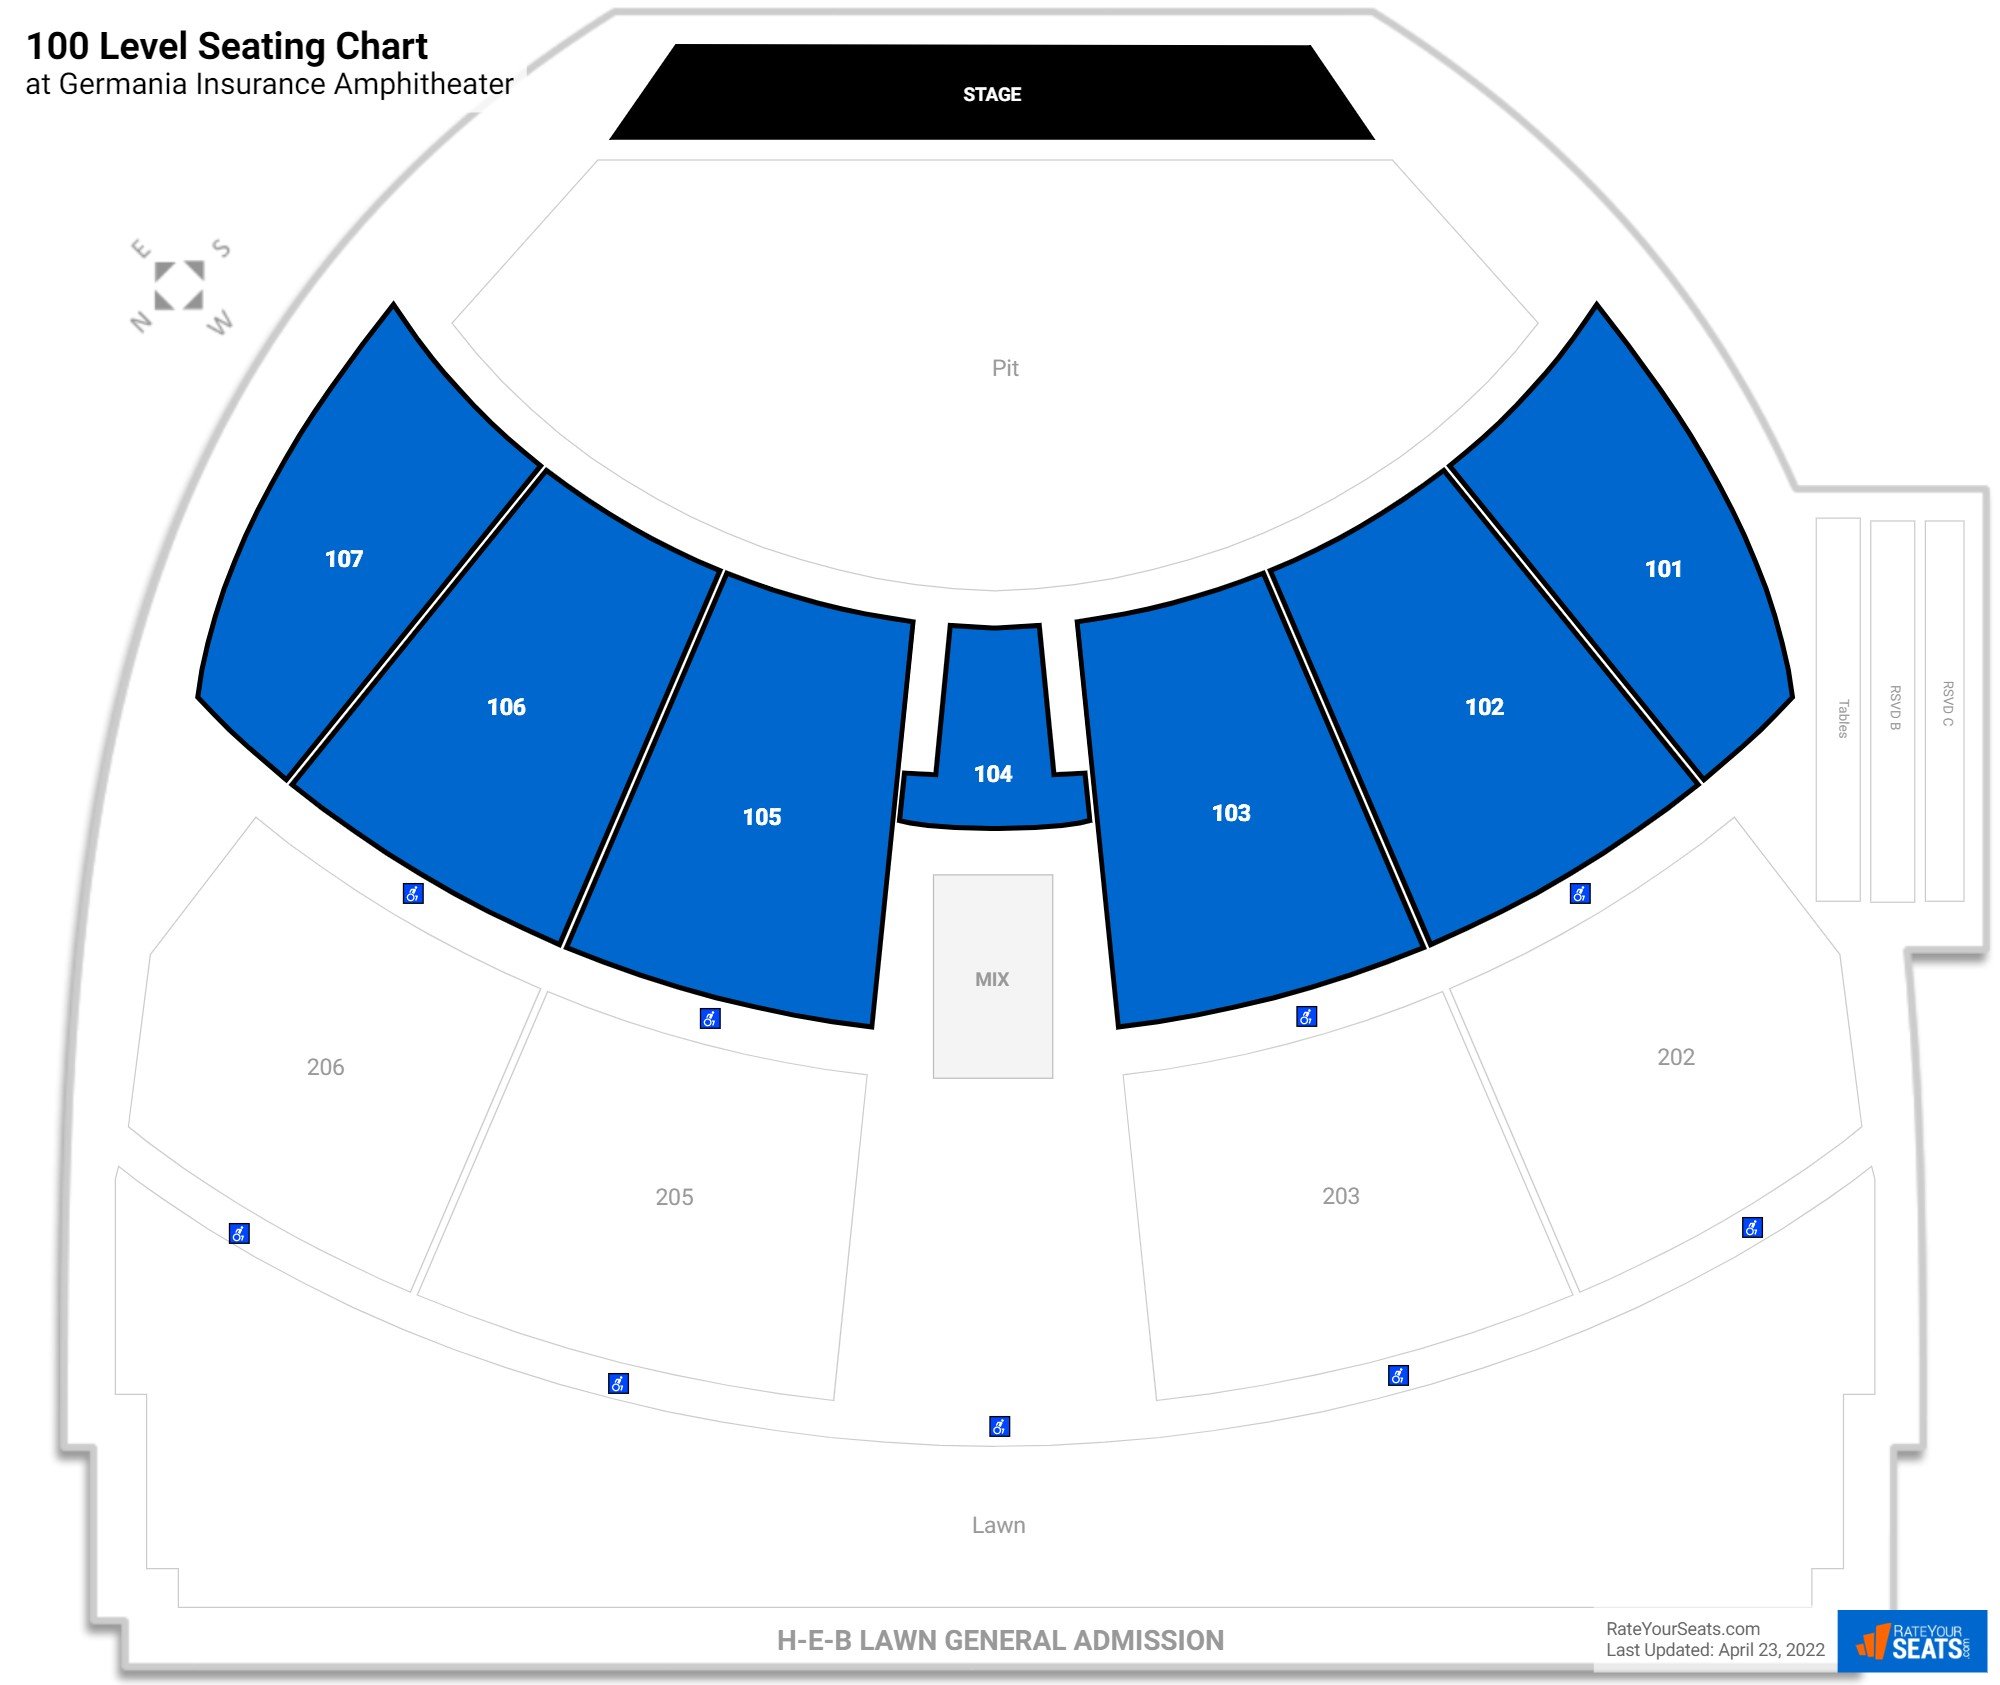 Concert 100 Level Seating Chart at Germania Insurance Amphitheater